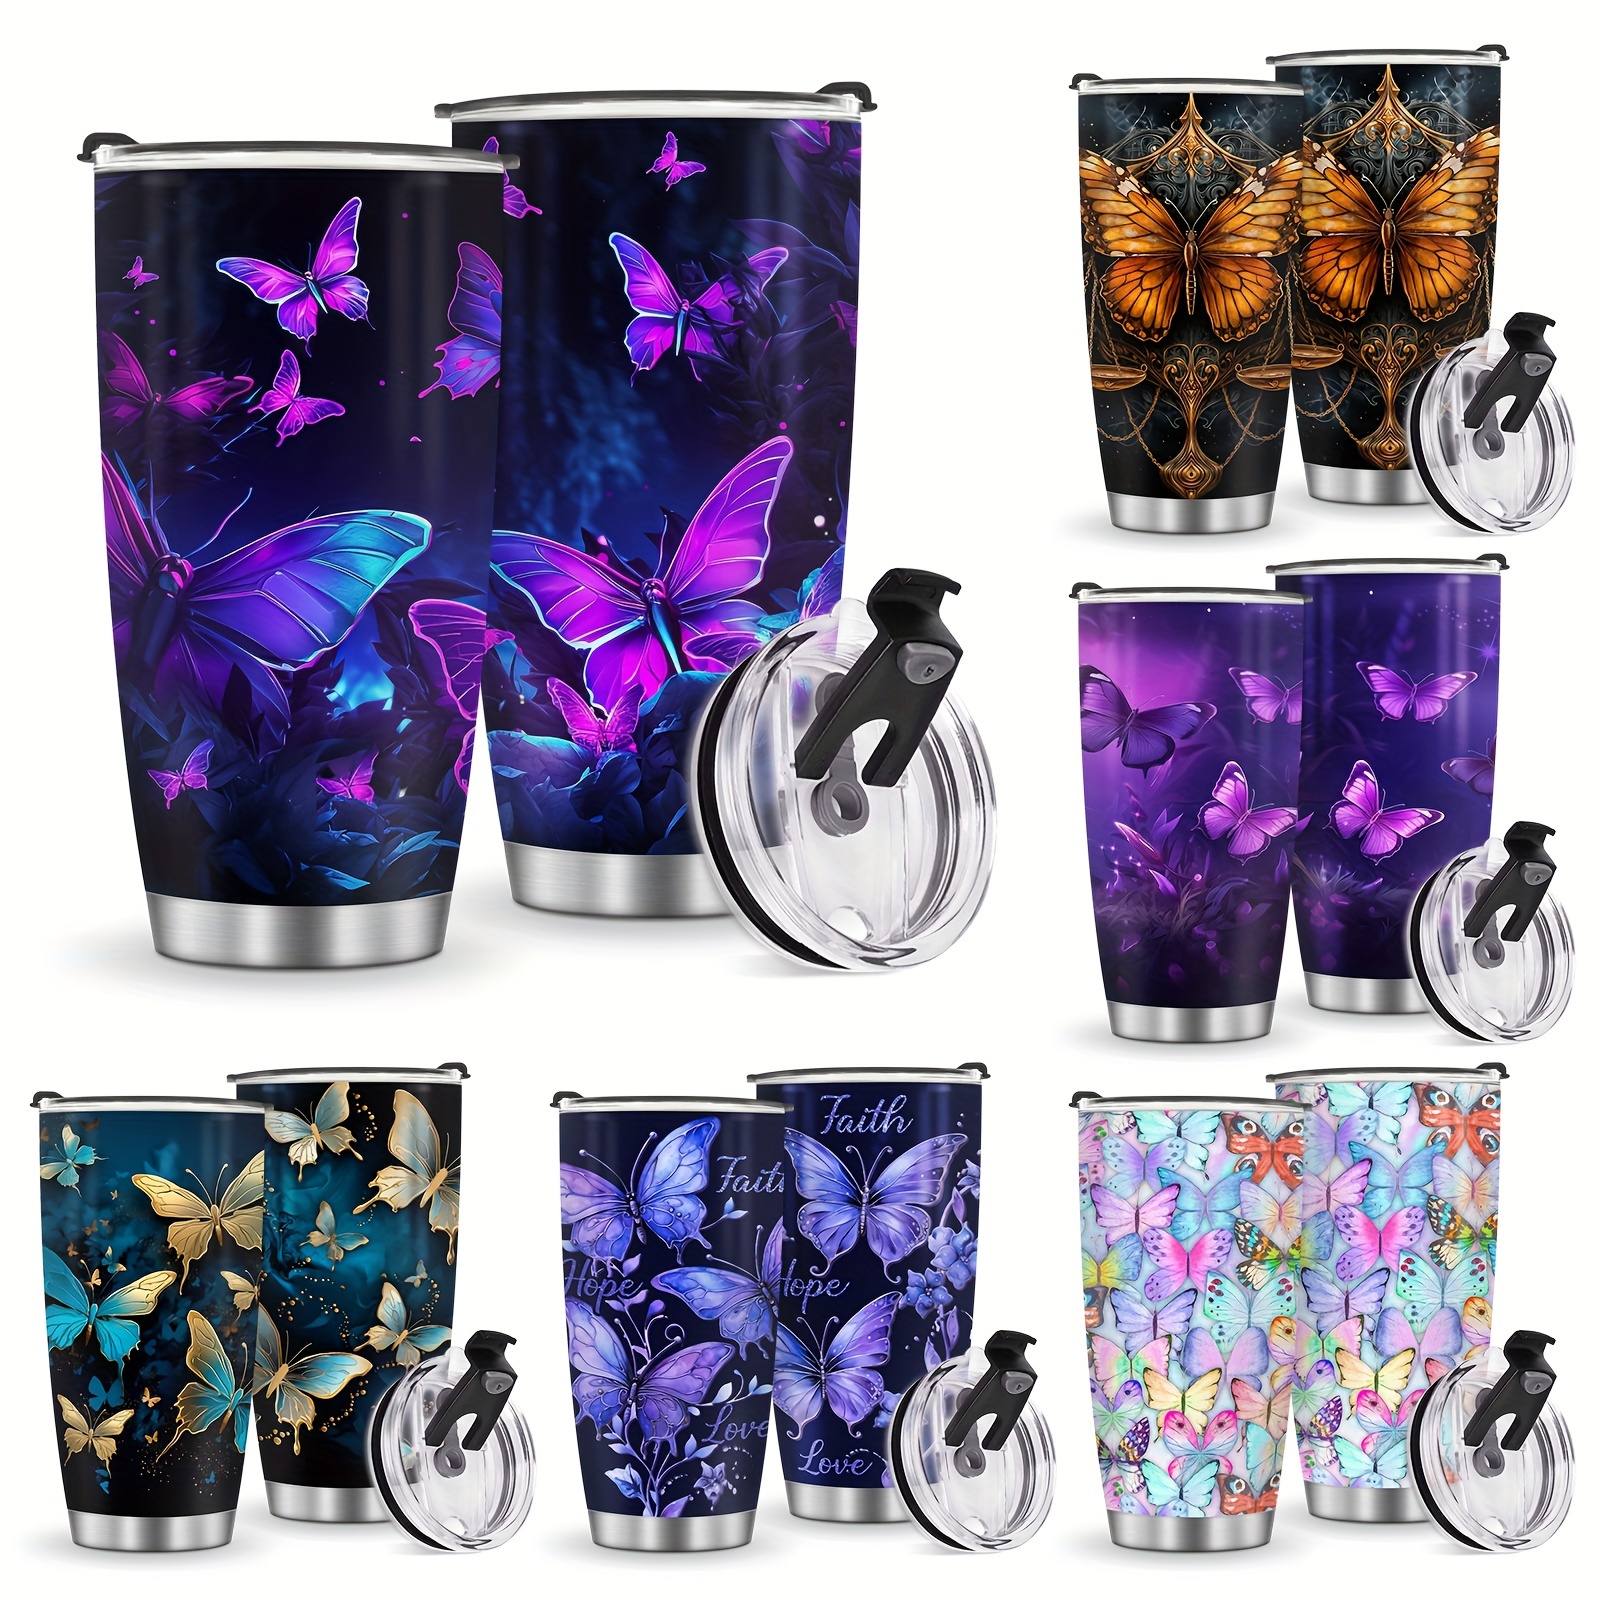 Butterfly Tumbler, Blue Purple Butterfly Gift, Butterfly Drinking Glasses/Tea Cup/Coffee Mug, Butterfly Decor Accessories- Butterfly Gifts for Women